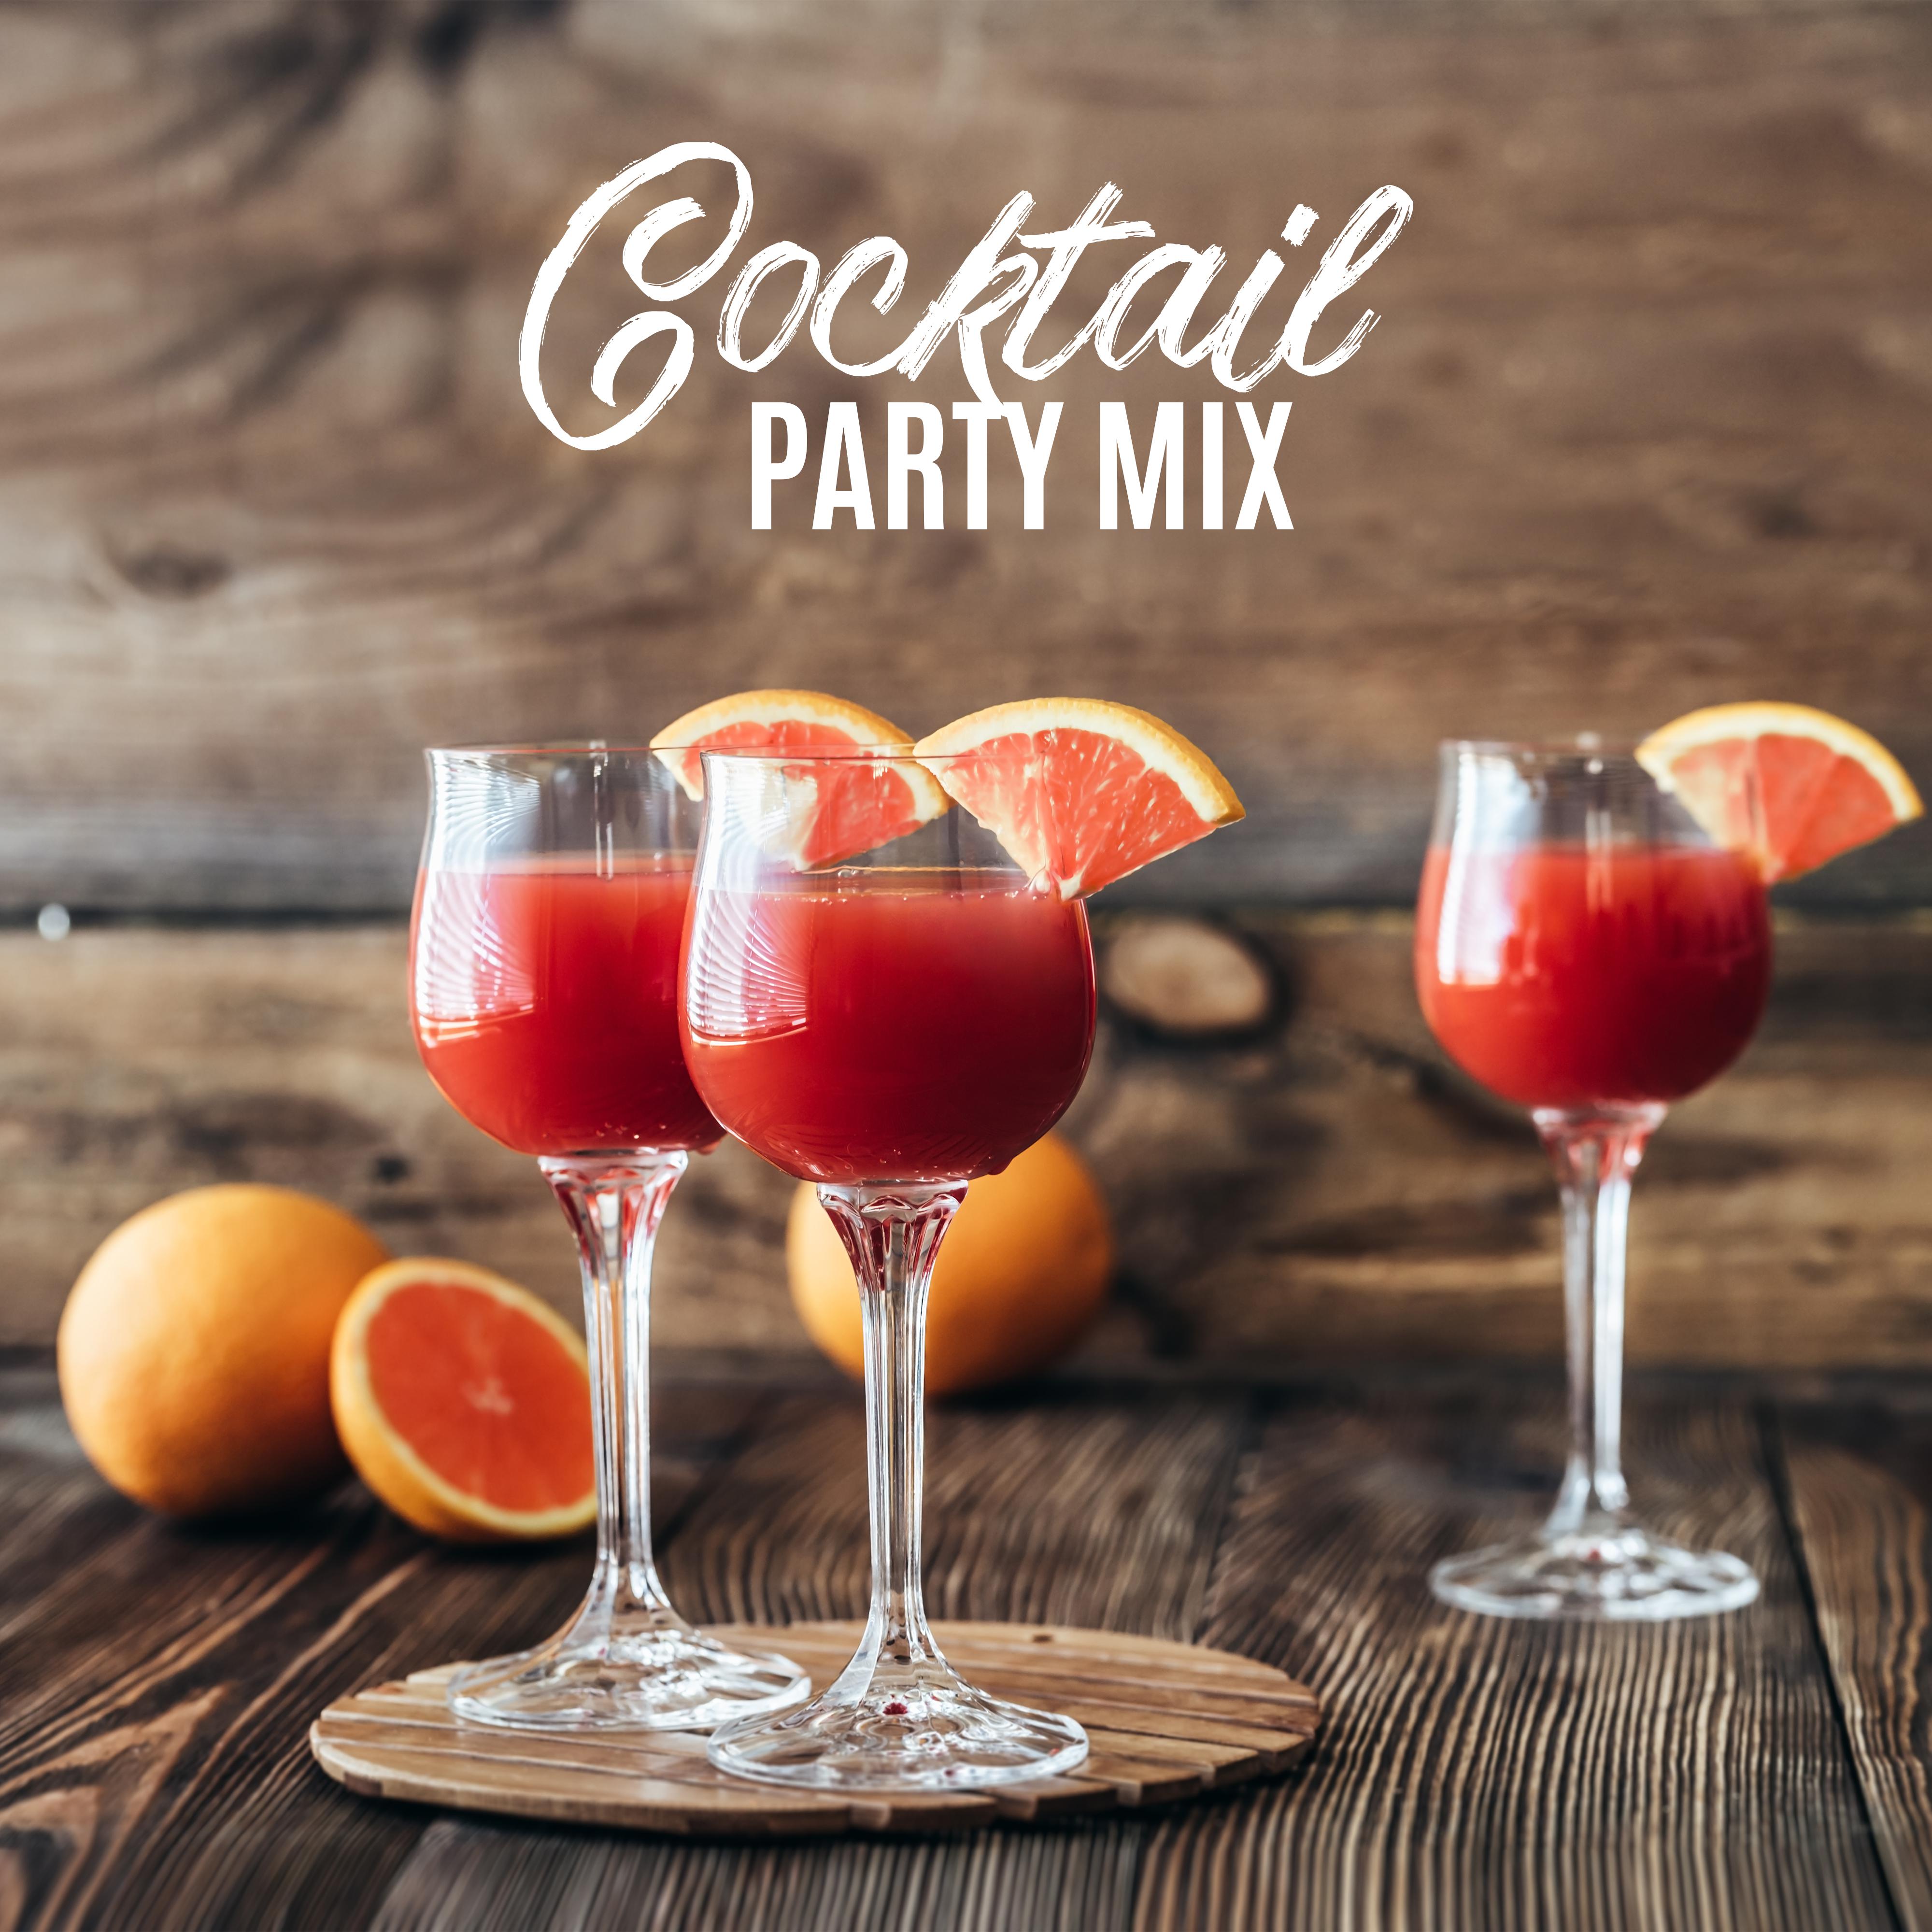 Cocktail Party Mix: Smooth Jazz Energetic Music 2019 for Elegant Party, Vintage Dance Tracks, Songs for Good Mood, Easy Listening Background Melodies